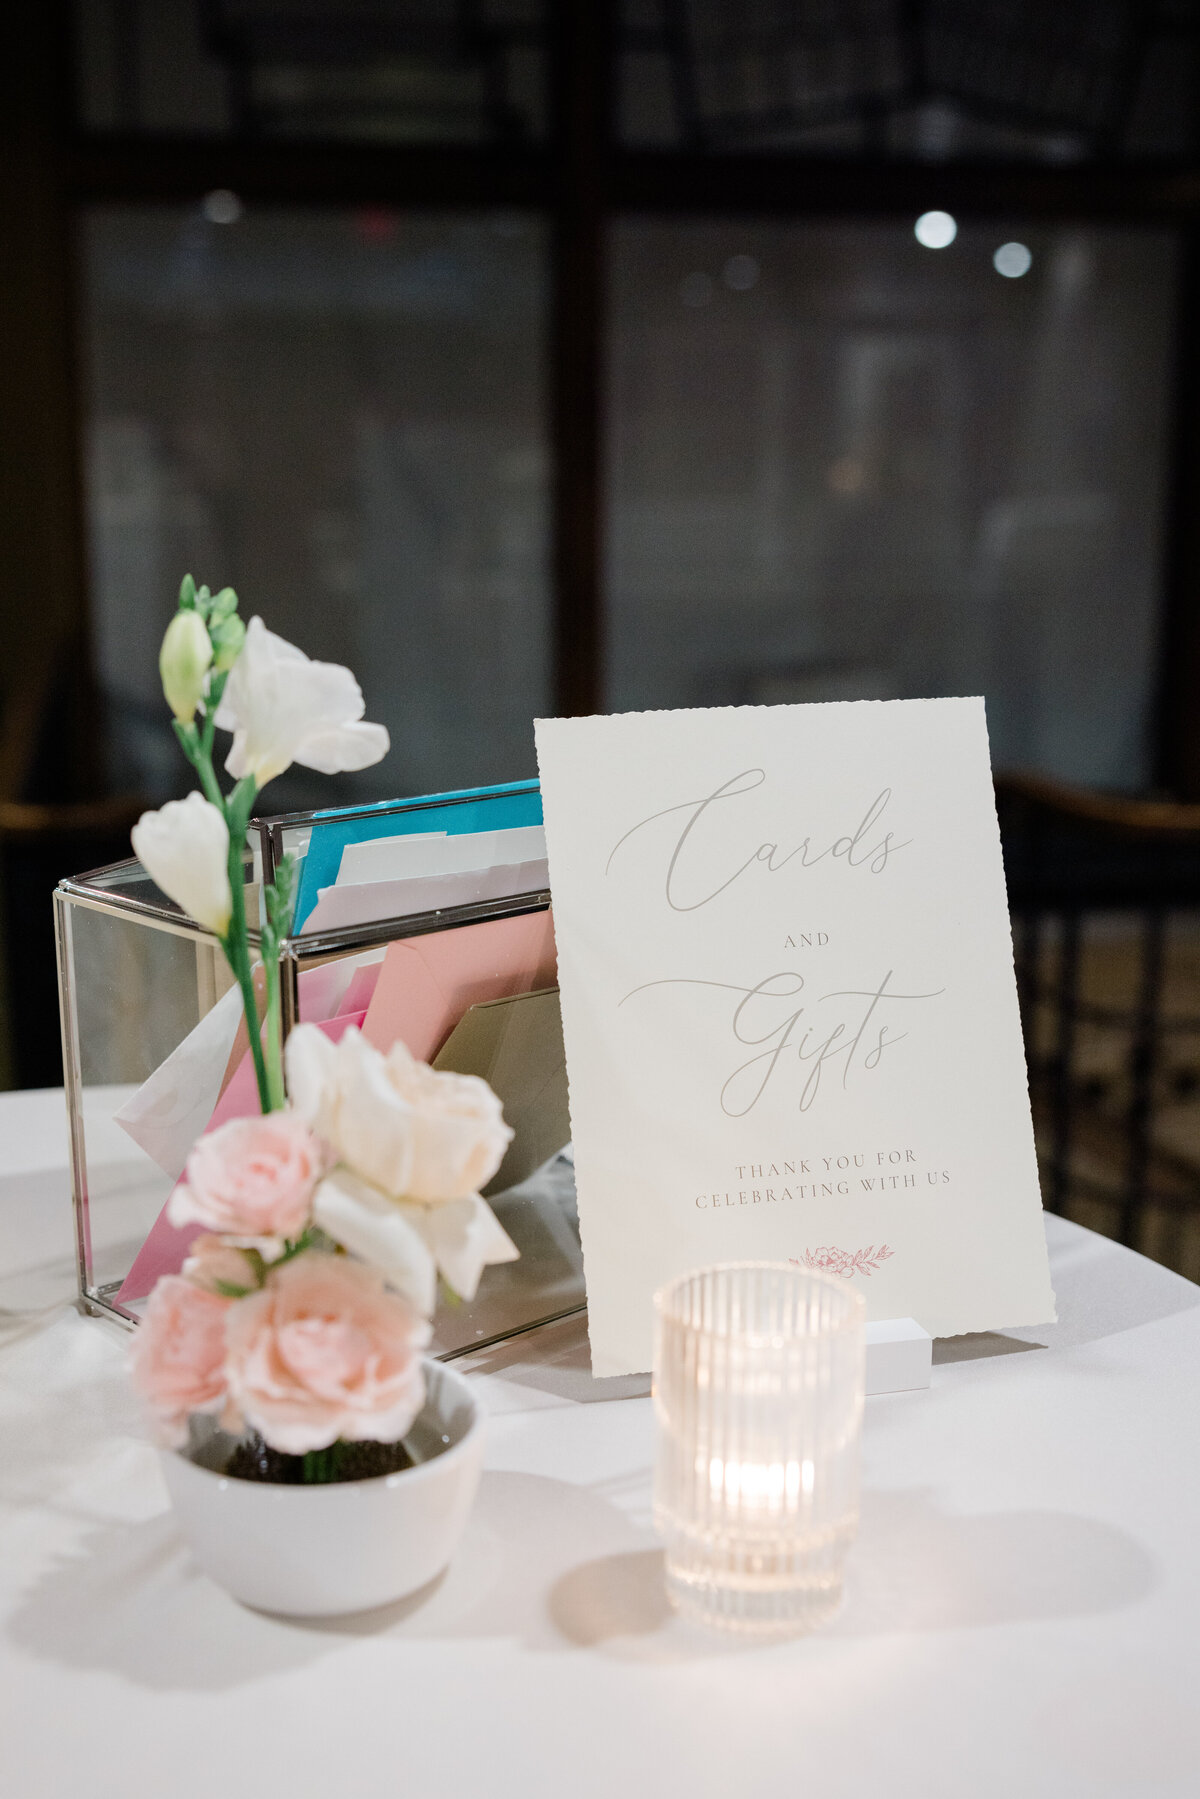 Intimate-blush-blooms-and-greenery-transform-this-gift-table